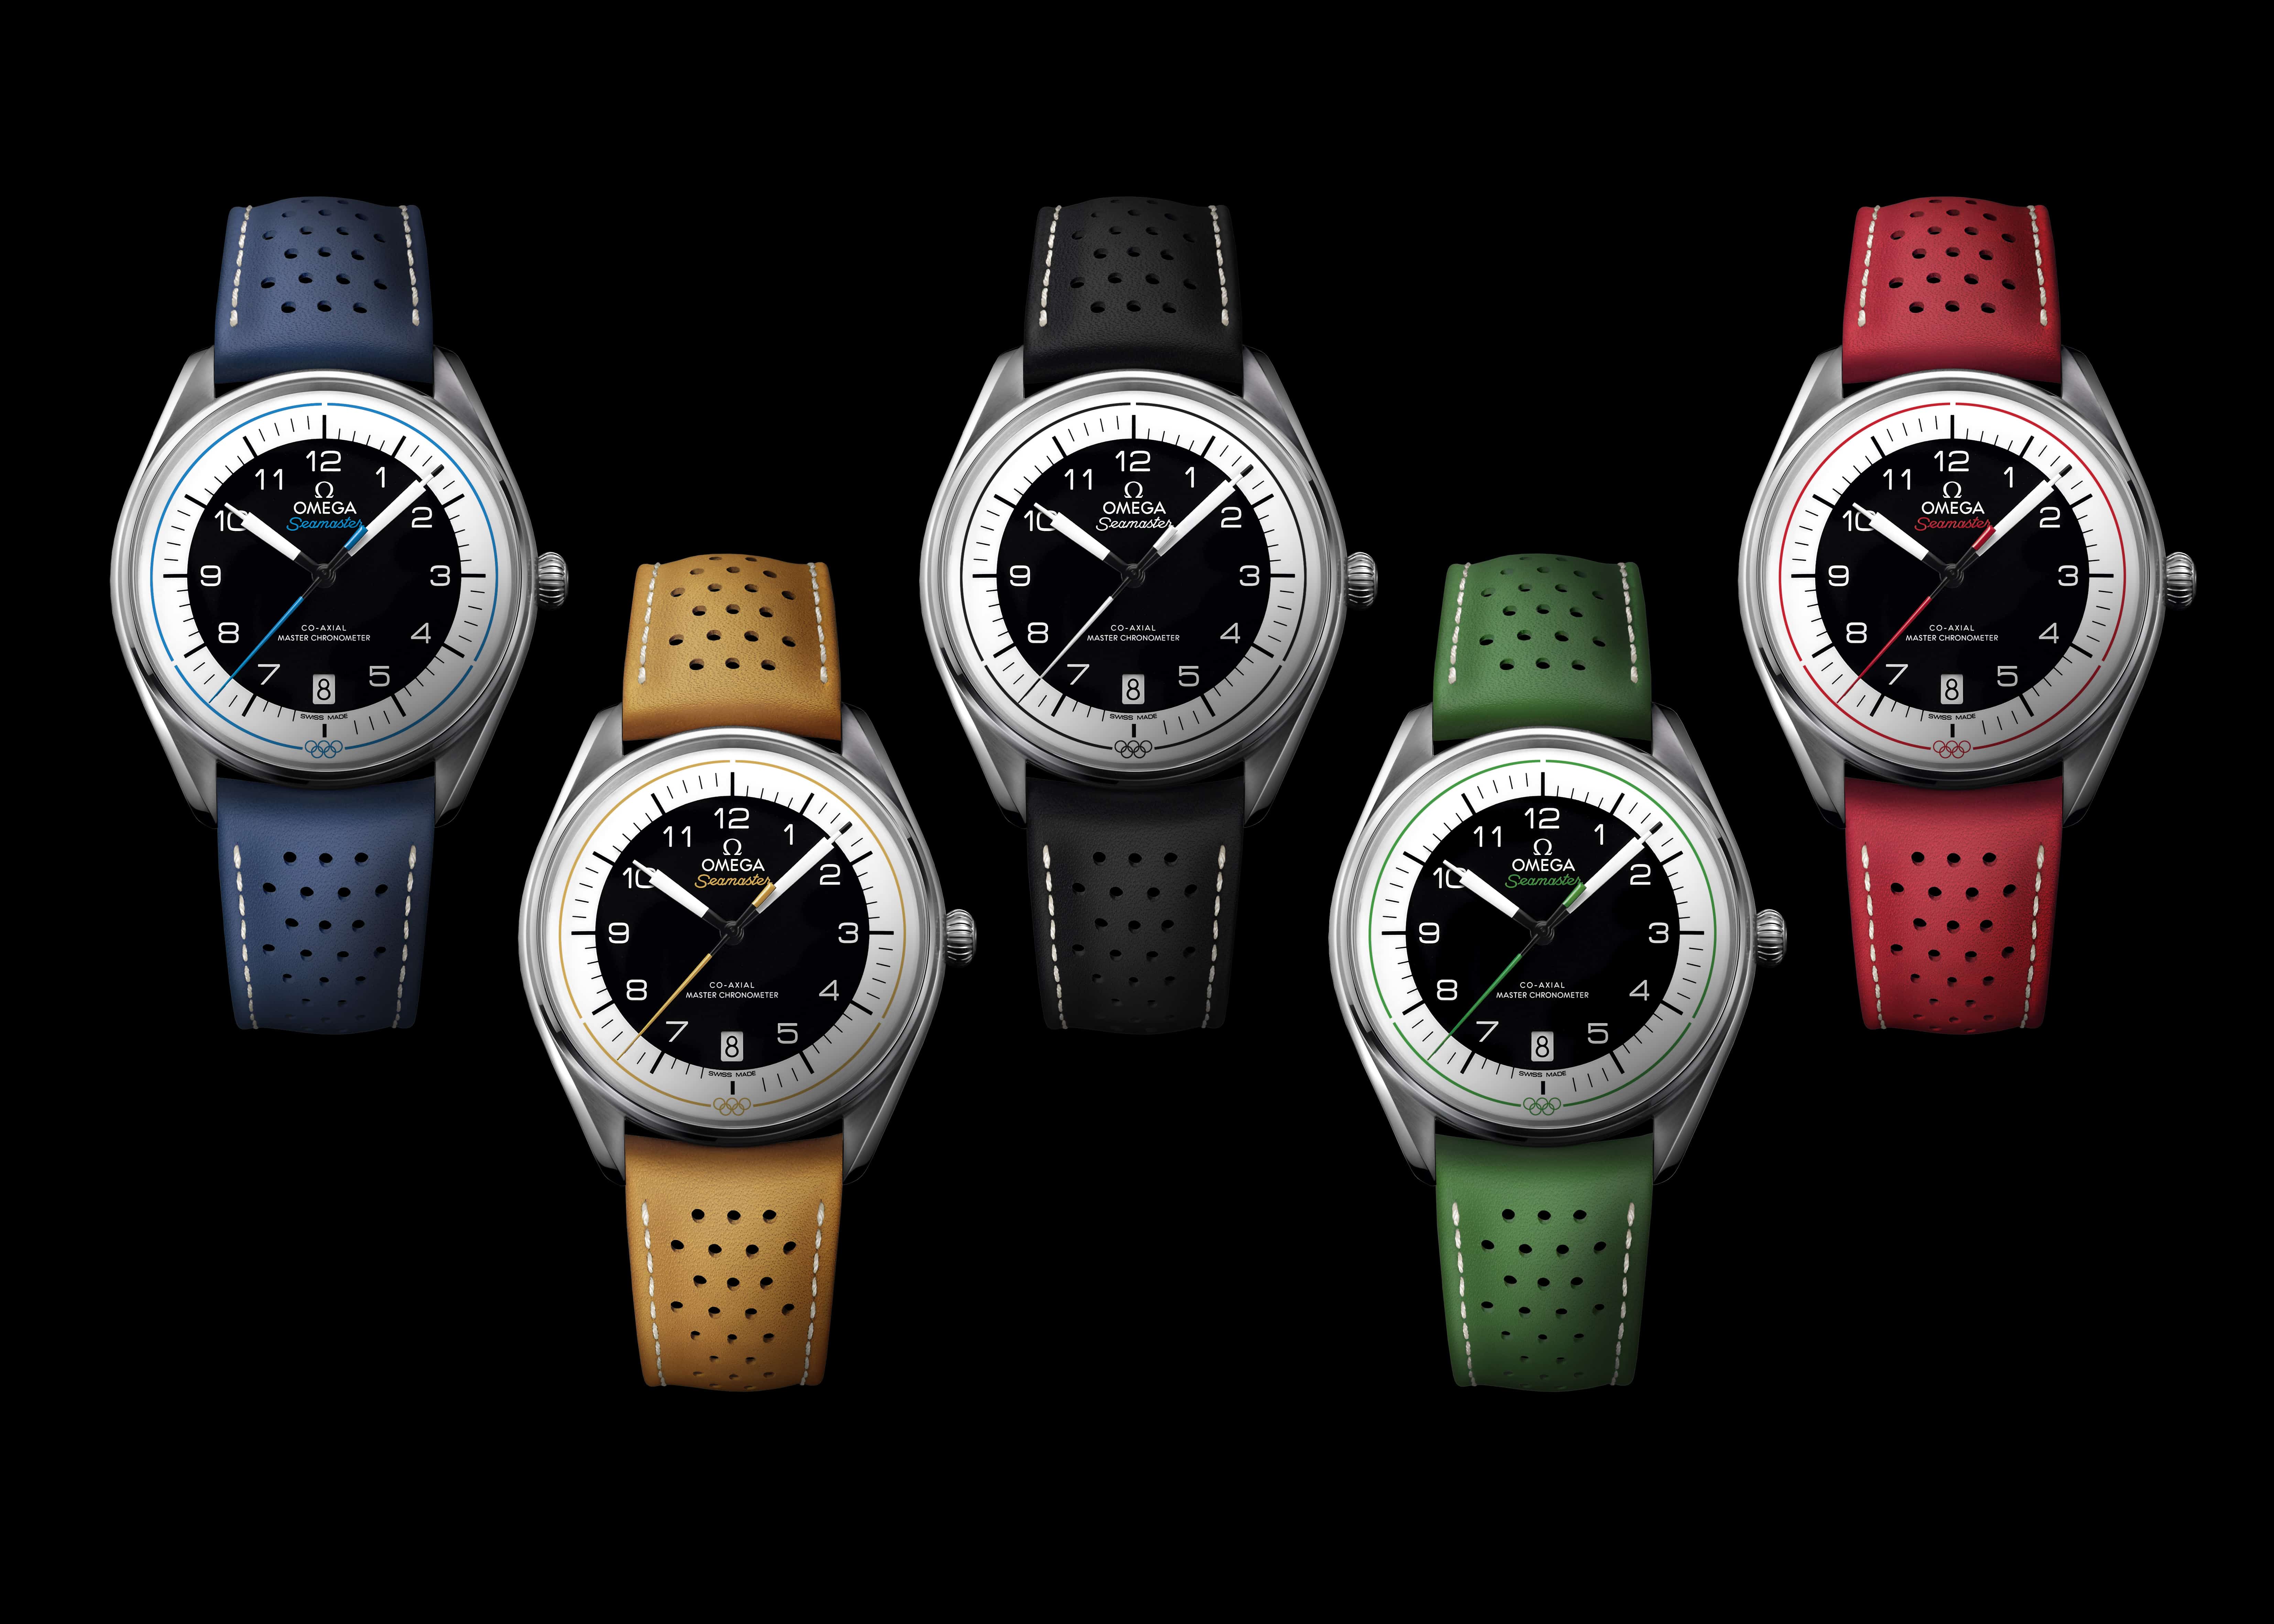 EcoLux☆Lifestyle: Omega: Official Timekeeper of the Olympic Games